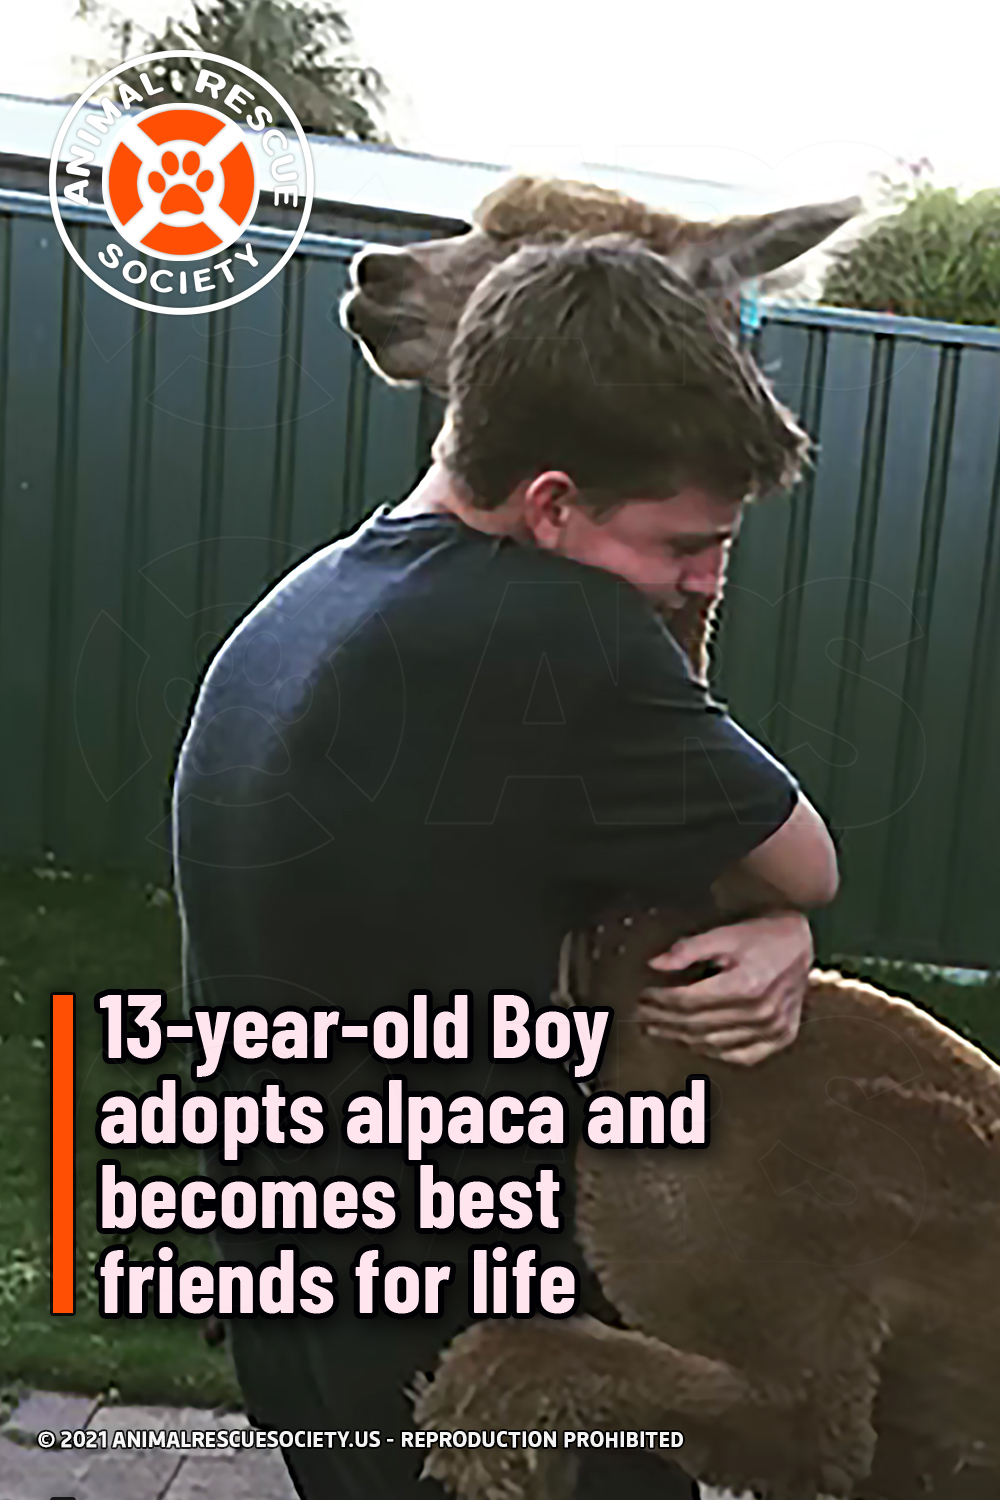 13-year-old Boy adopts alpaca and becomes best friends for life